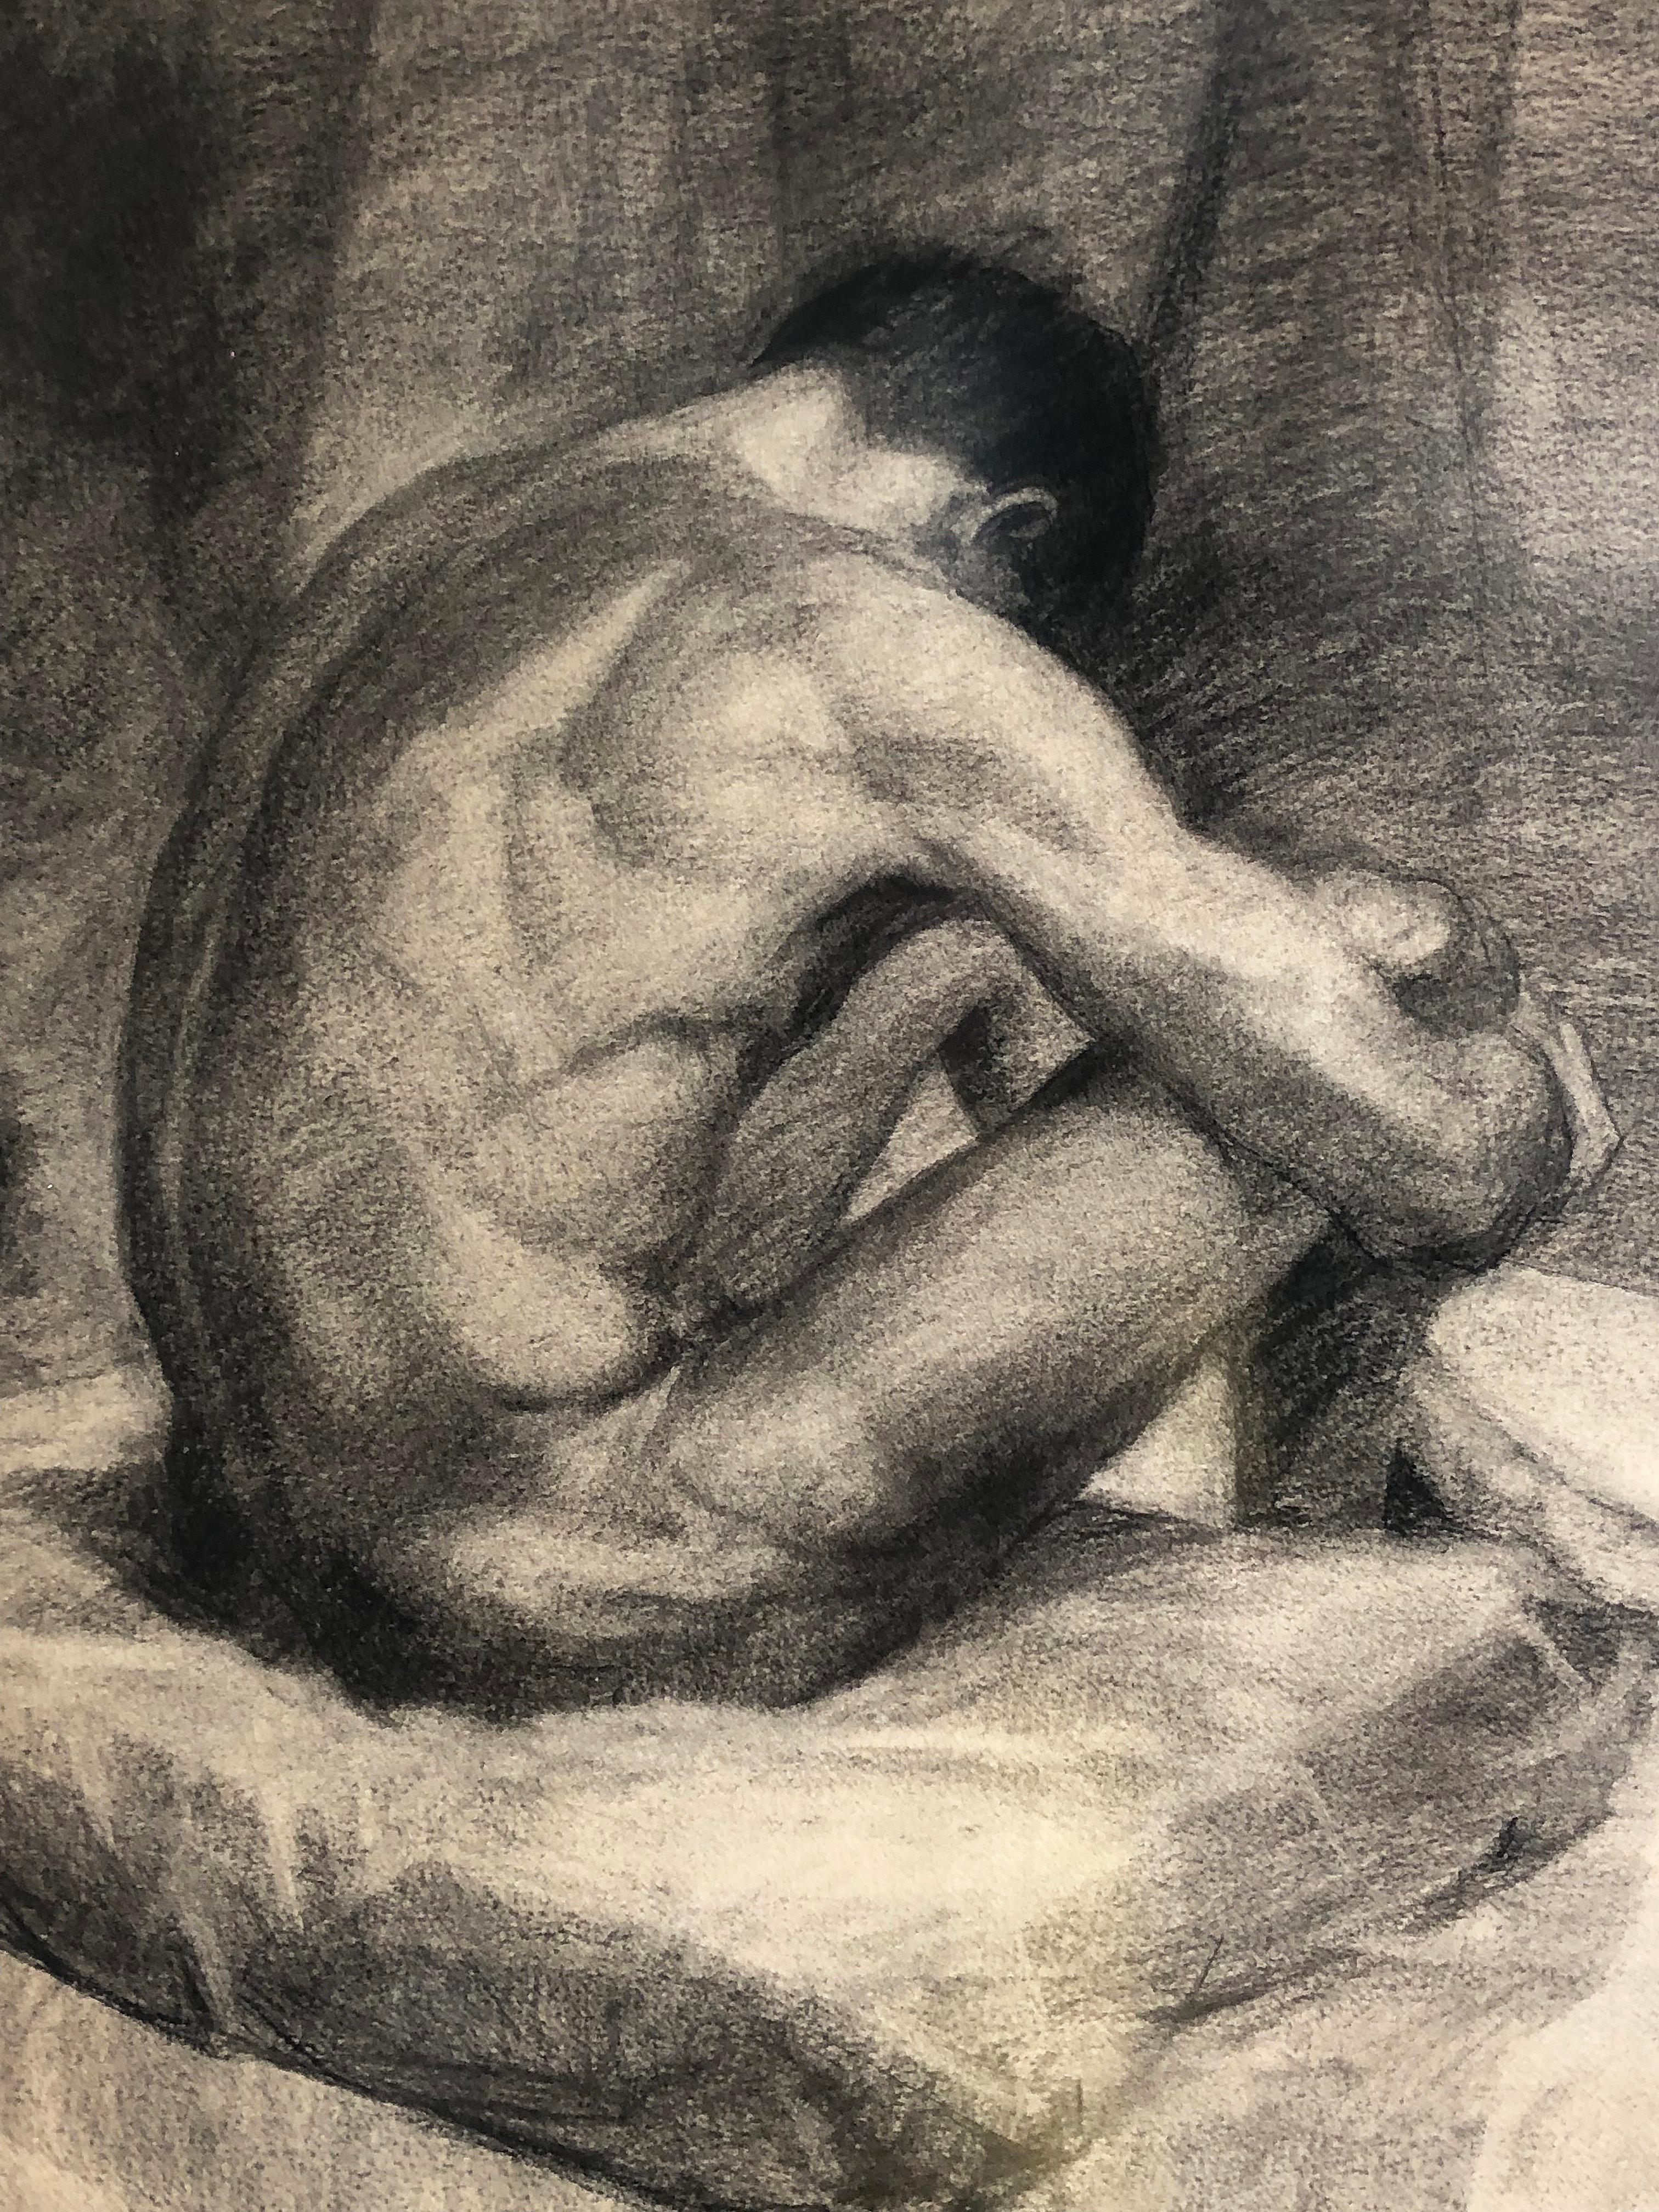 Plexiglass 1940s Male Nude Art Study Drawing in Charcoal on Paper